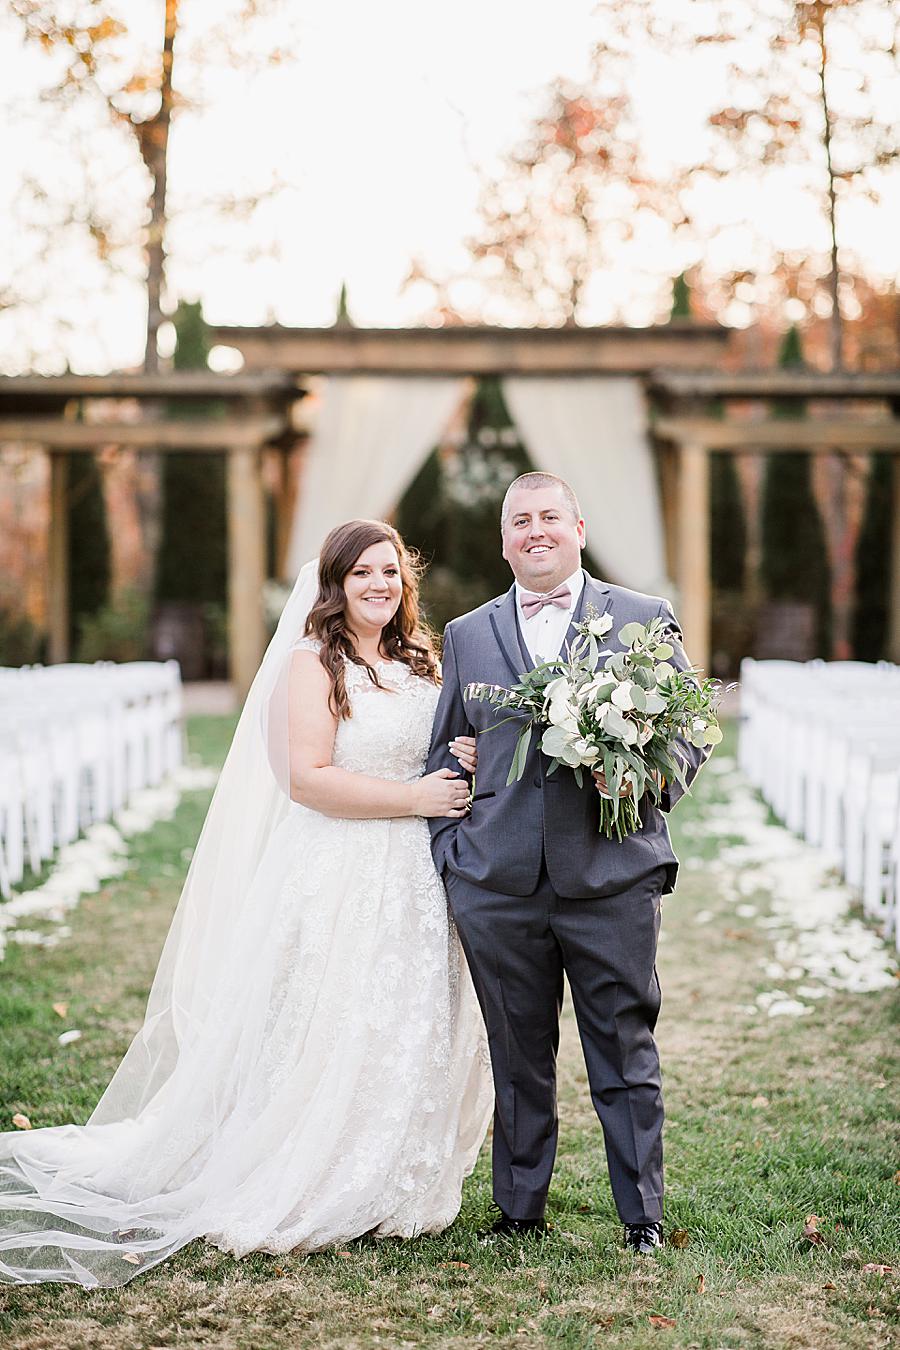 Mr and Mrs at this Wedding at Castleton Farms by Knoxville Wedding Photographer, Amanda May Photos.